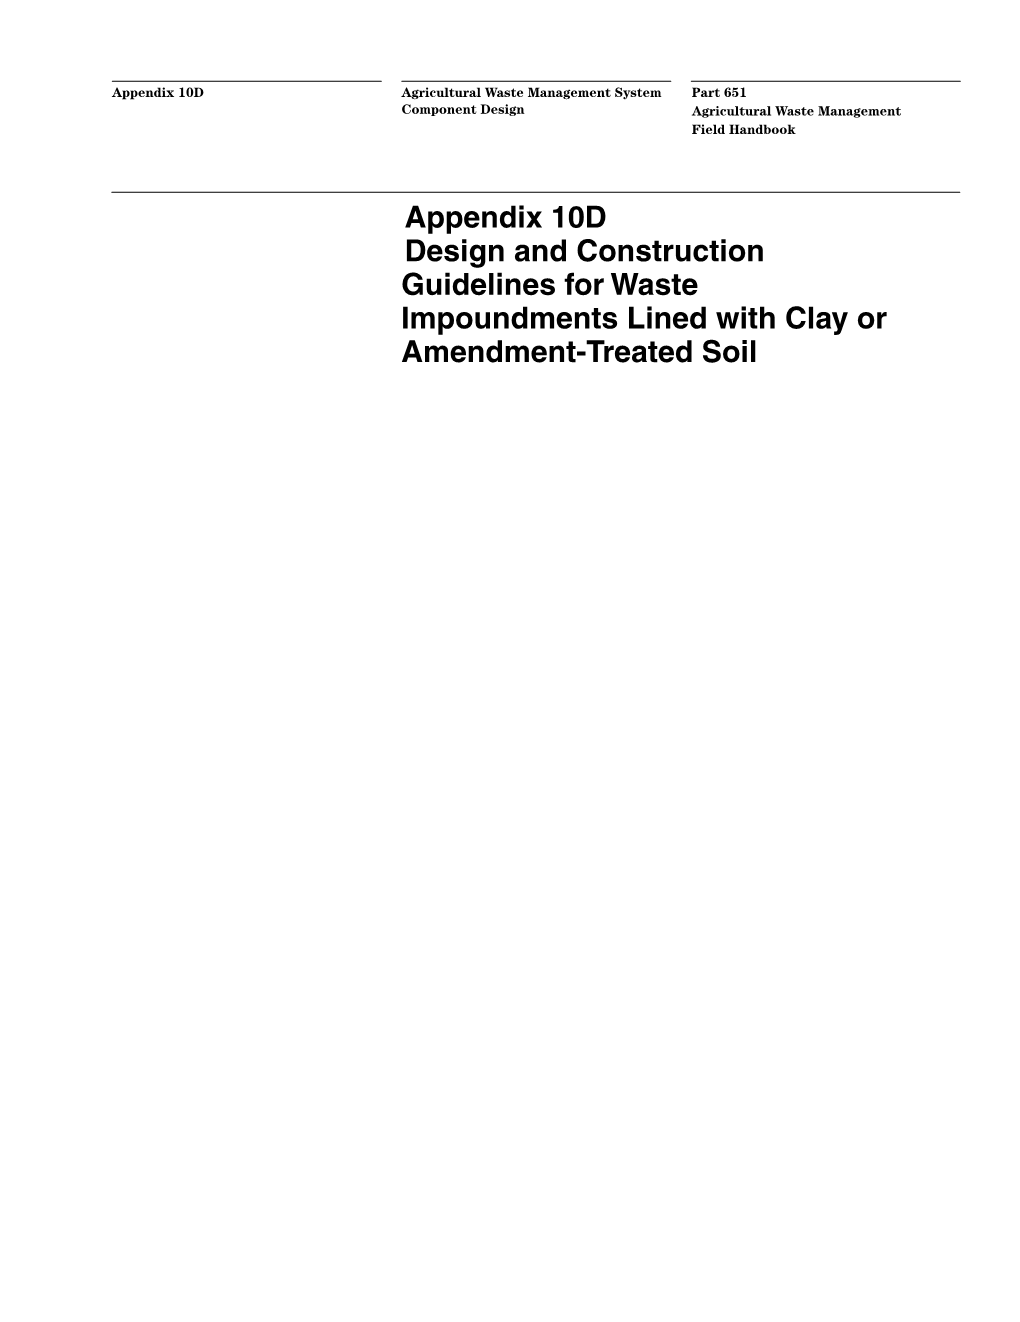 Appendix 10D Design and Construction Guidelines for Waste